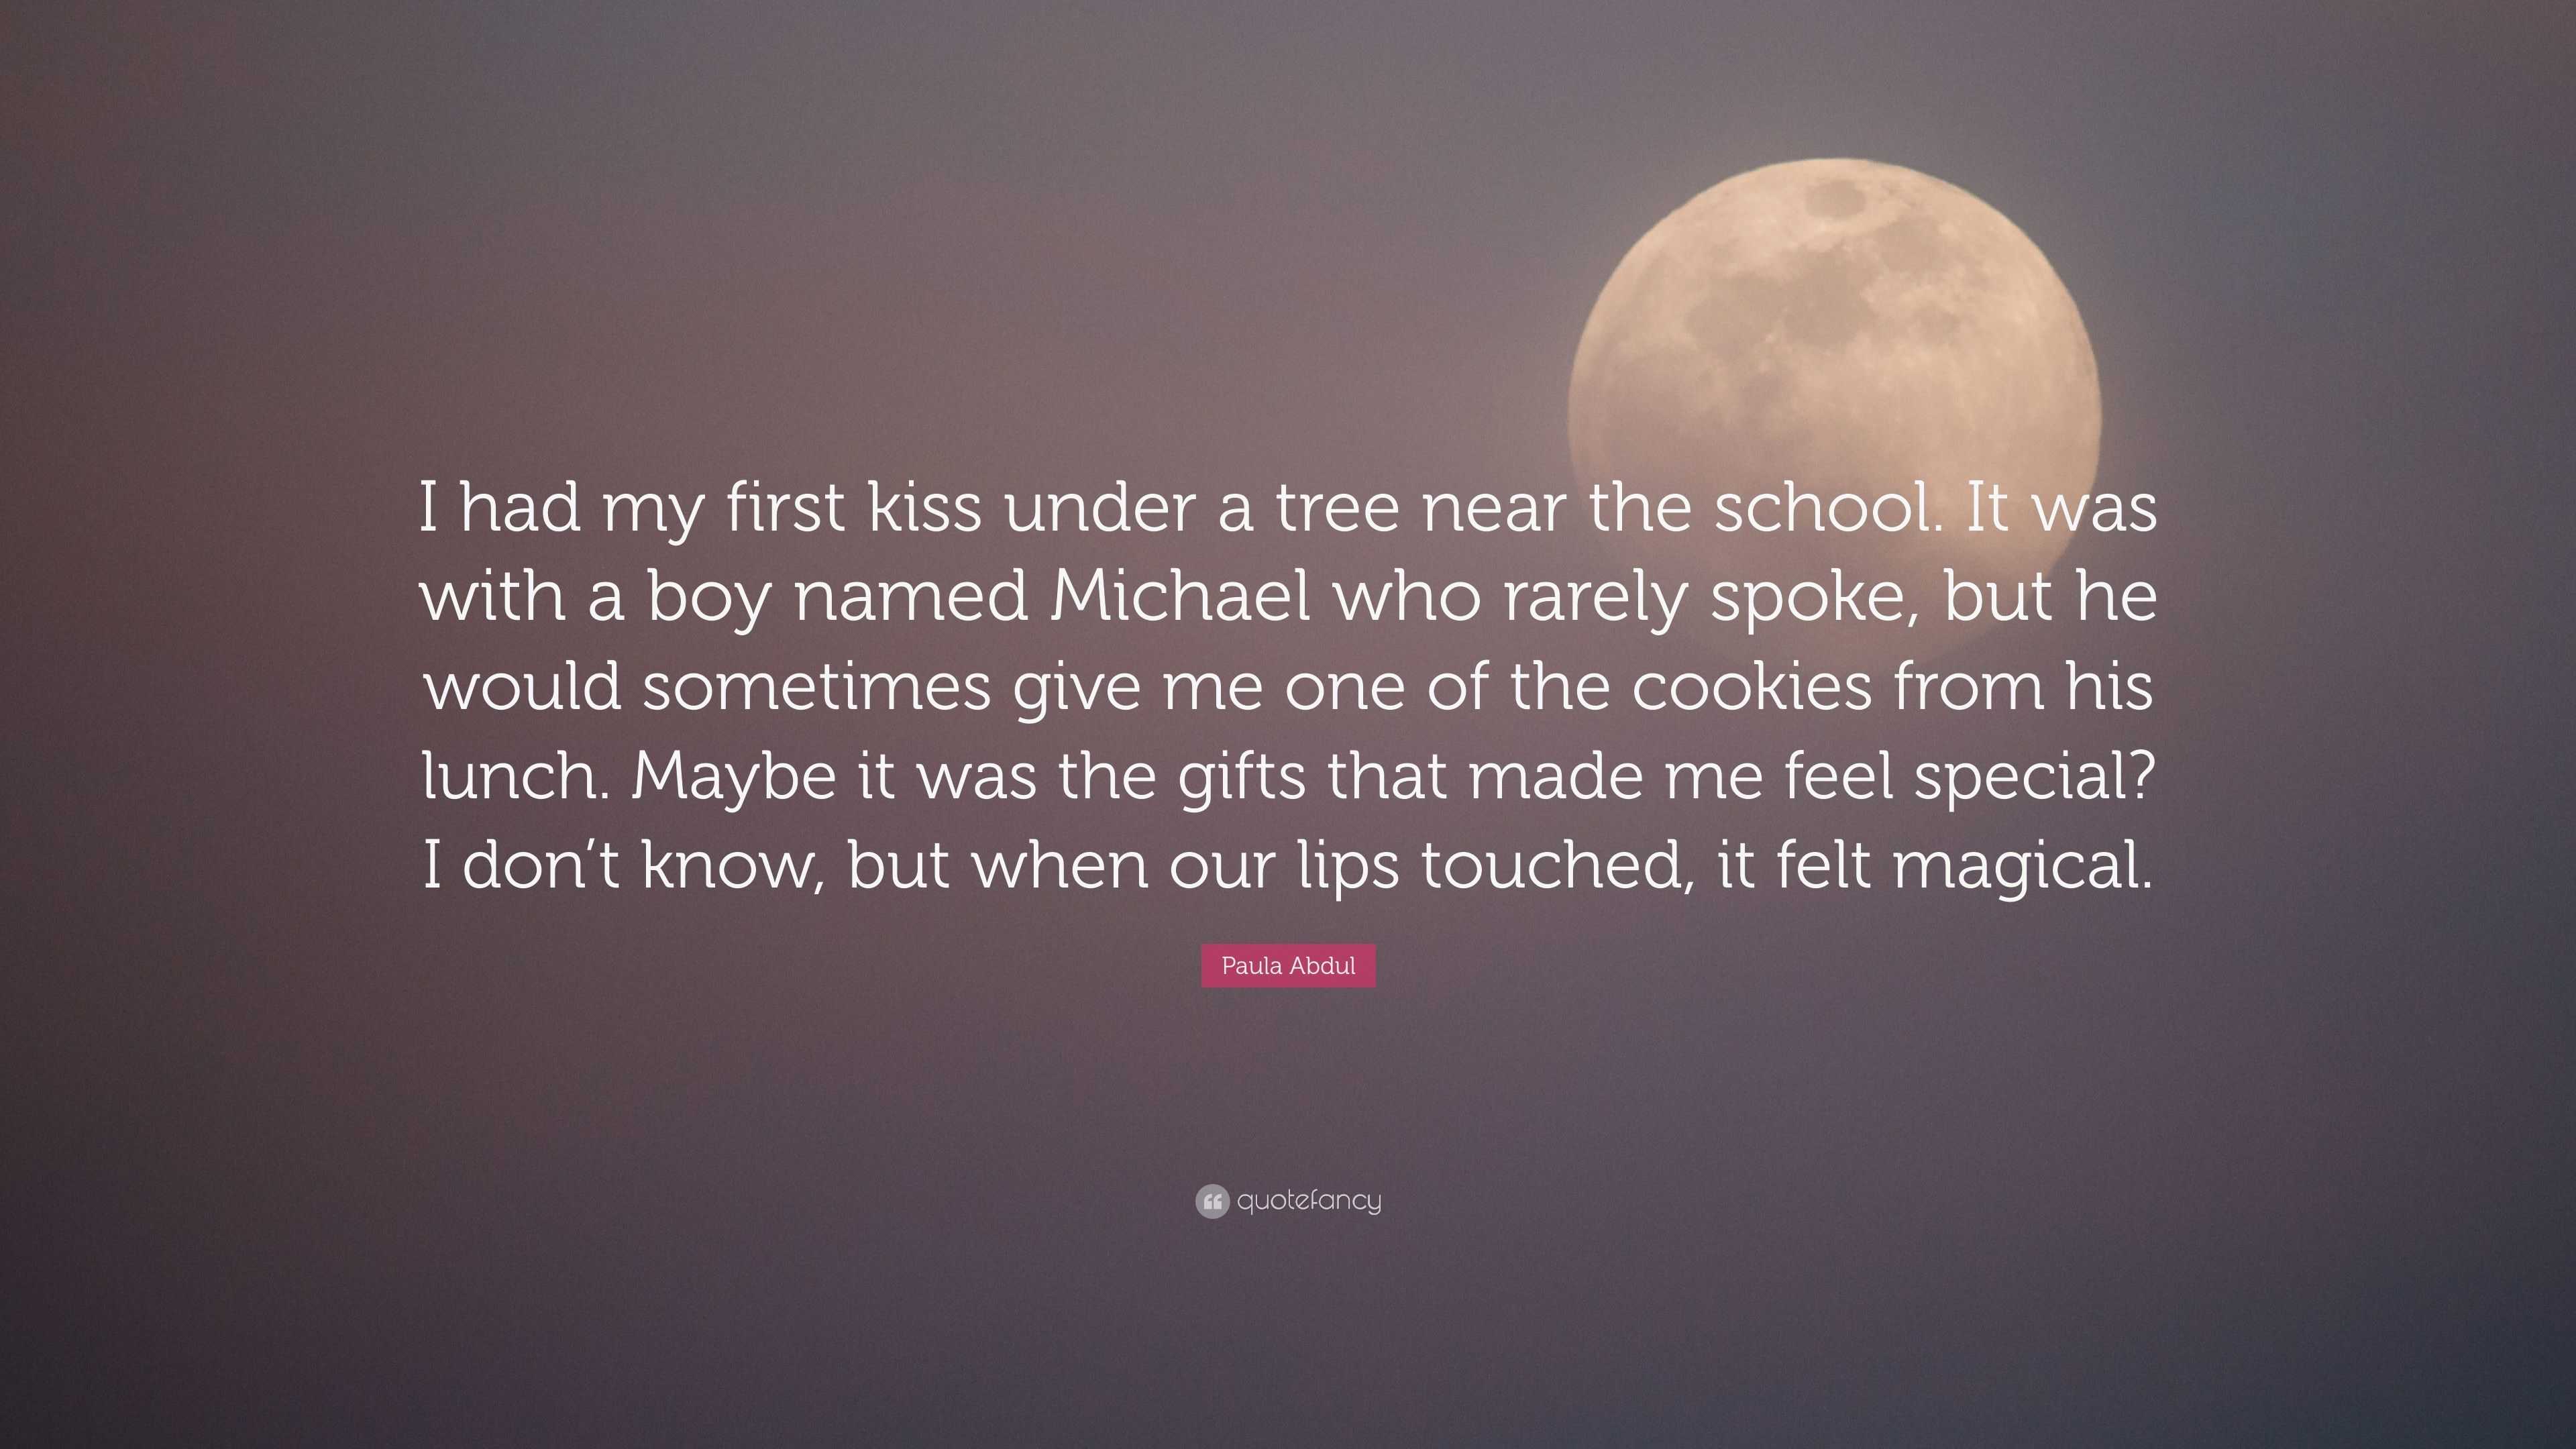 Paula Abdul Quote I Had My First Kiss Under A Tree Near The School It Was With A Boy Named Michael Who Rarely Spoke But He Would Sometim